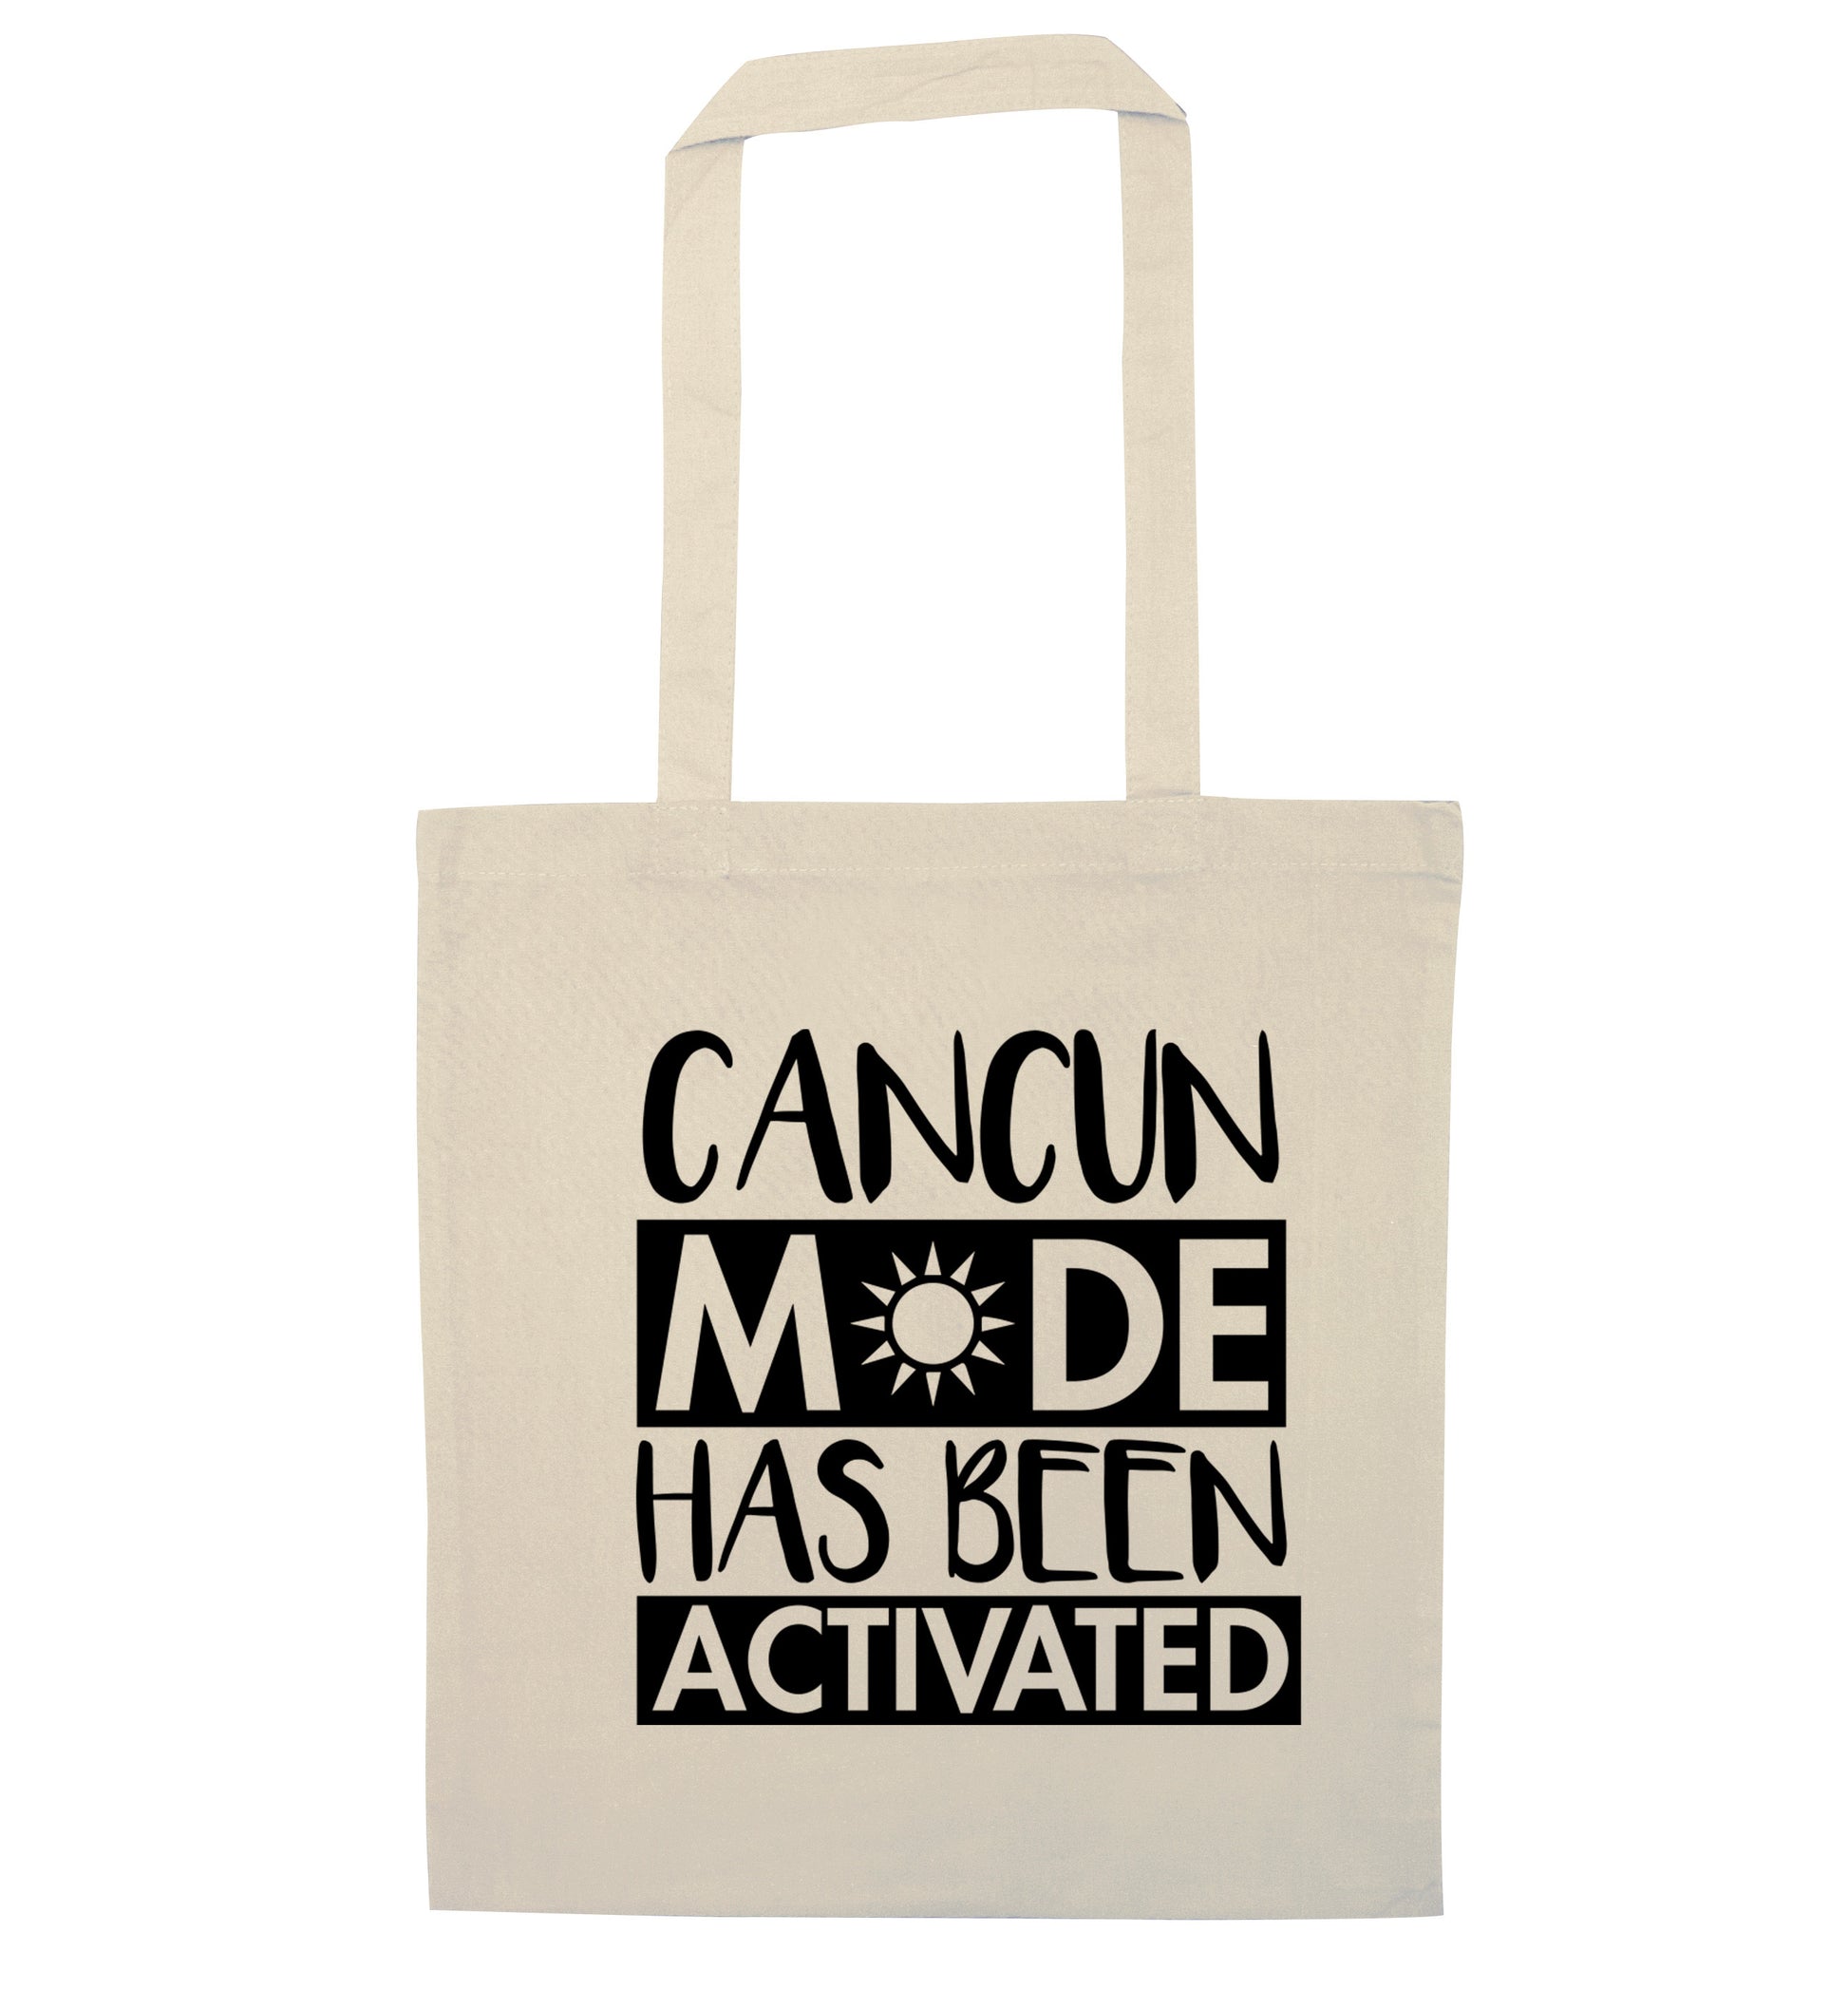 Cancun mode has been activated natural tote bag